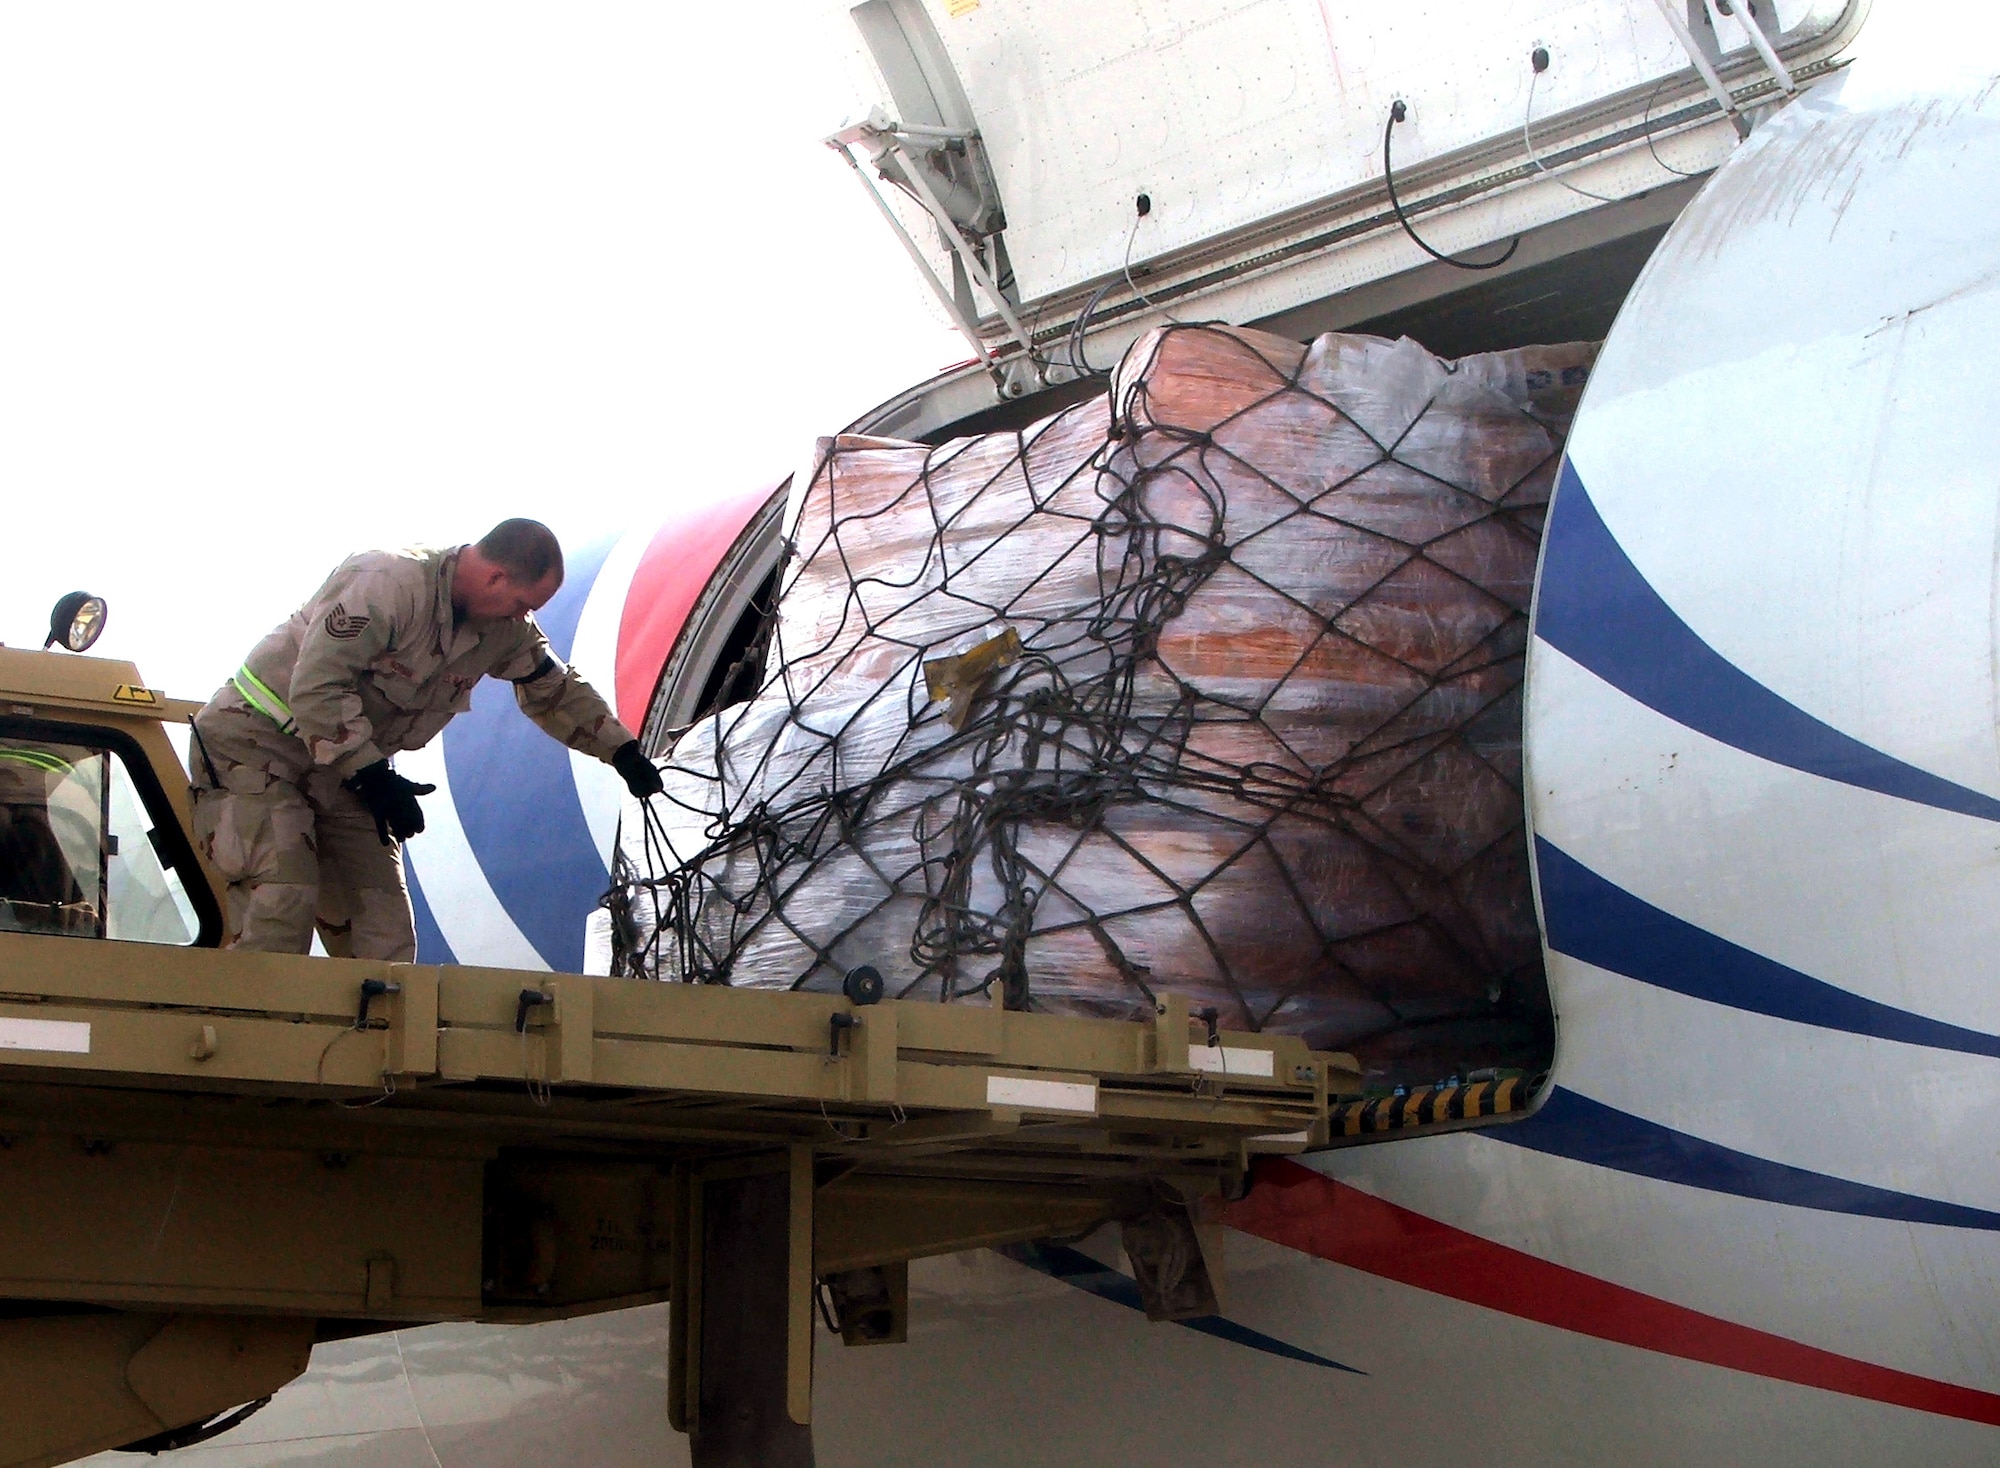 KARSHI-KHANABAD AIR BASE, Uzbekistan -- Tech. Sgt. Bringham Norman helps move a pallet filled with mail here recently.  He is an air transportation craftsman with the 416th Expeditionary Mission Support Squadron's Air Terminal Operations Center from Maxwell Air Force Base, Ala.  (U.S. Air Force Photo by Tech. Sgt. Scott T. Sturkol)    